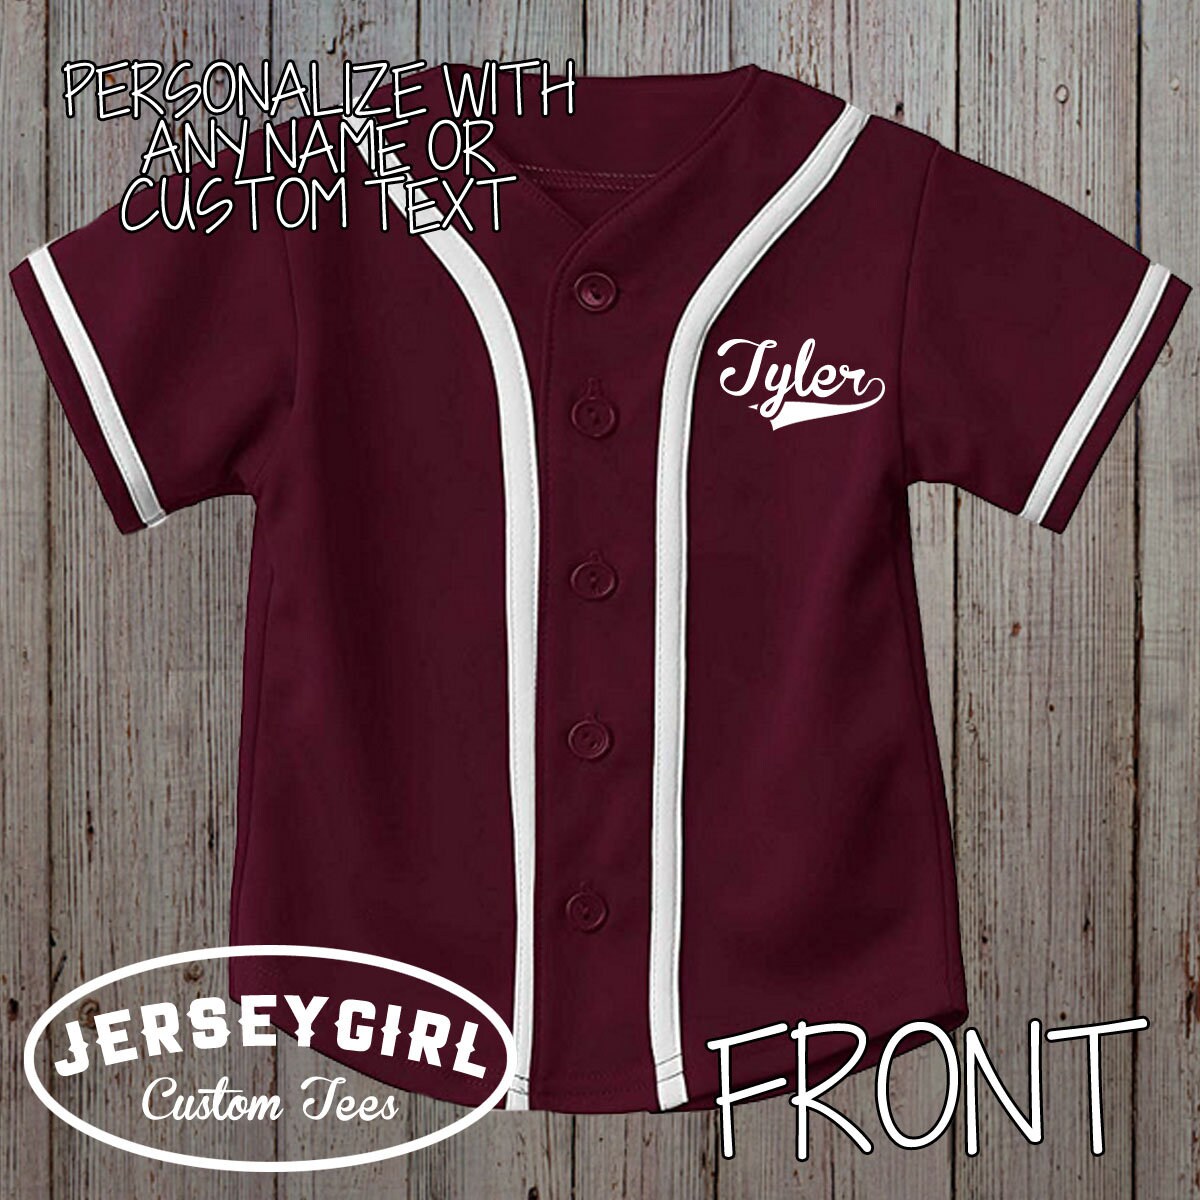 JerseyGirlCustomTees Set of 2 Custom Together Since Baseball Jerseys, Customized Couples Jerseys, His & Hers Jerseys Names, Personalized Husband and Wife Jerseys